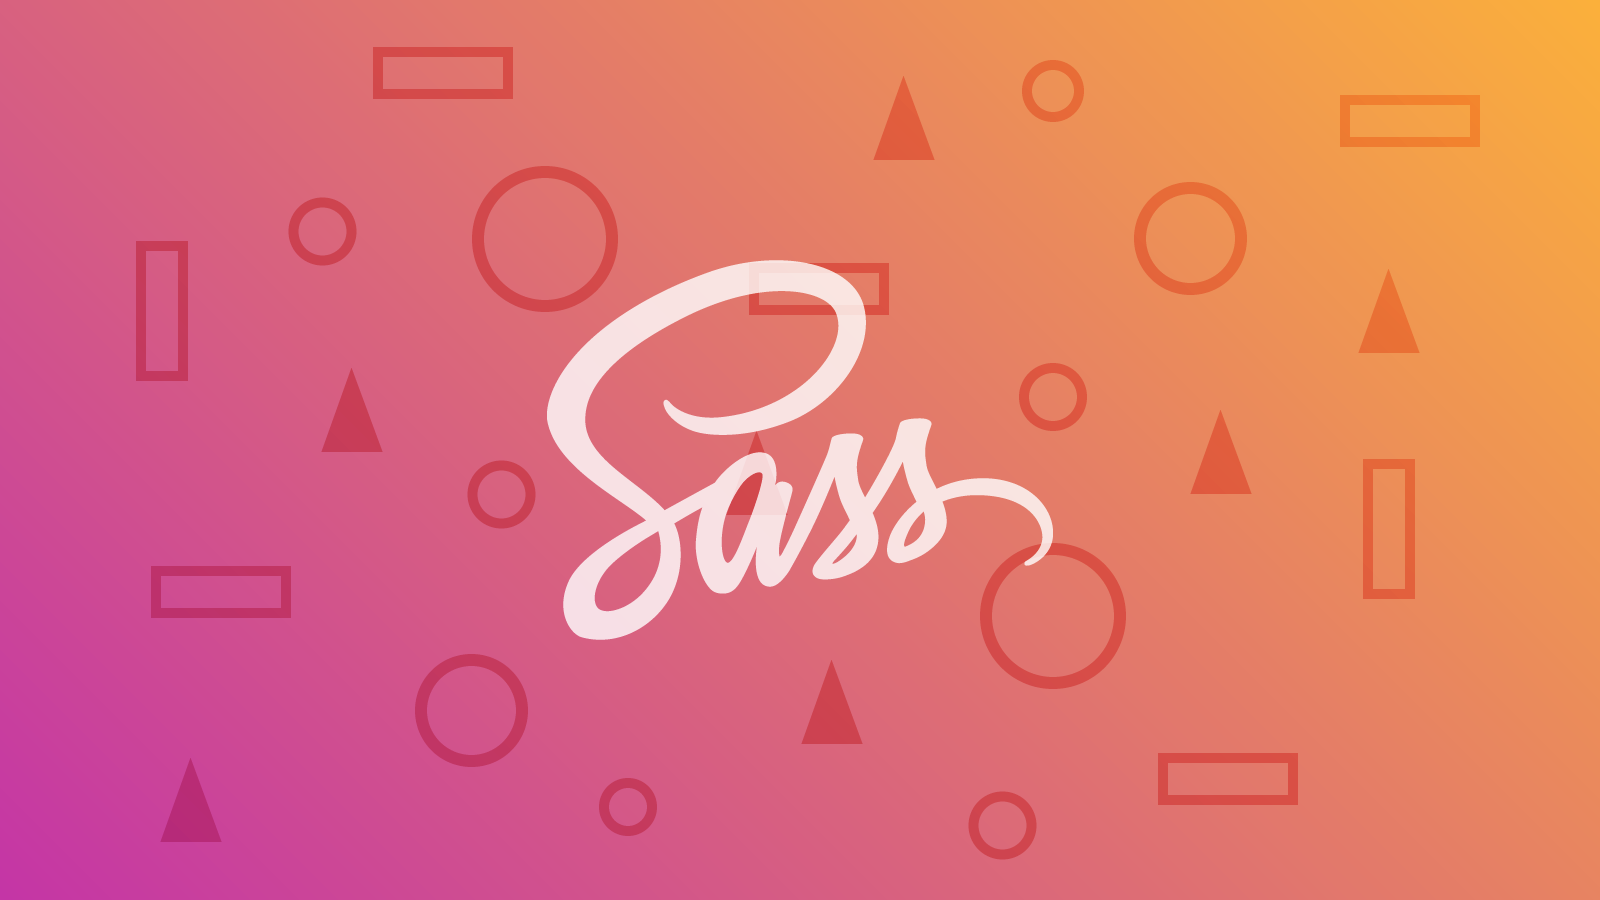 Sass logo on a pink gradient background